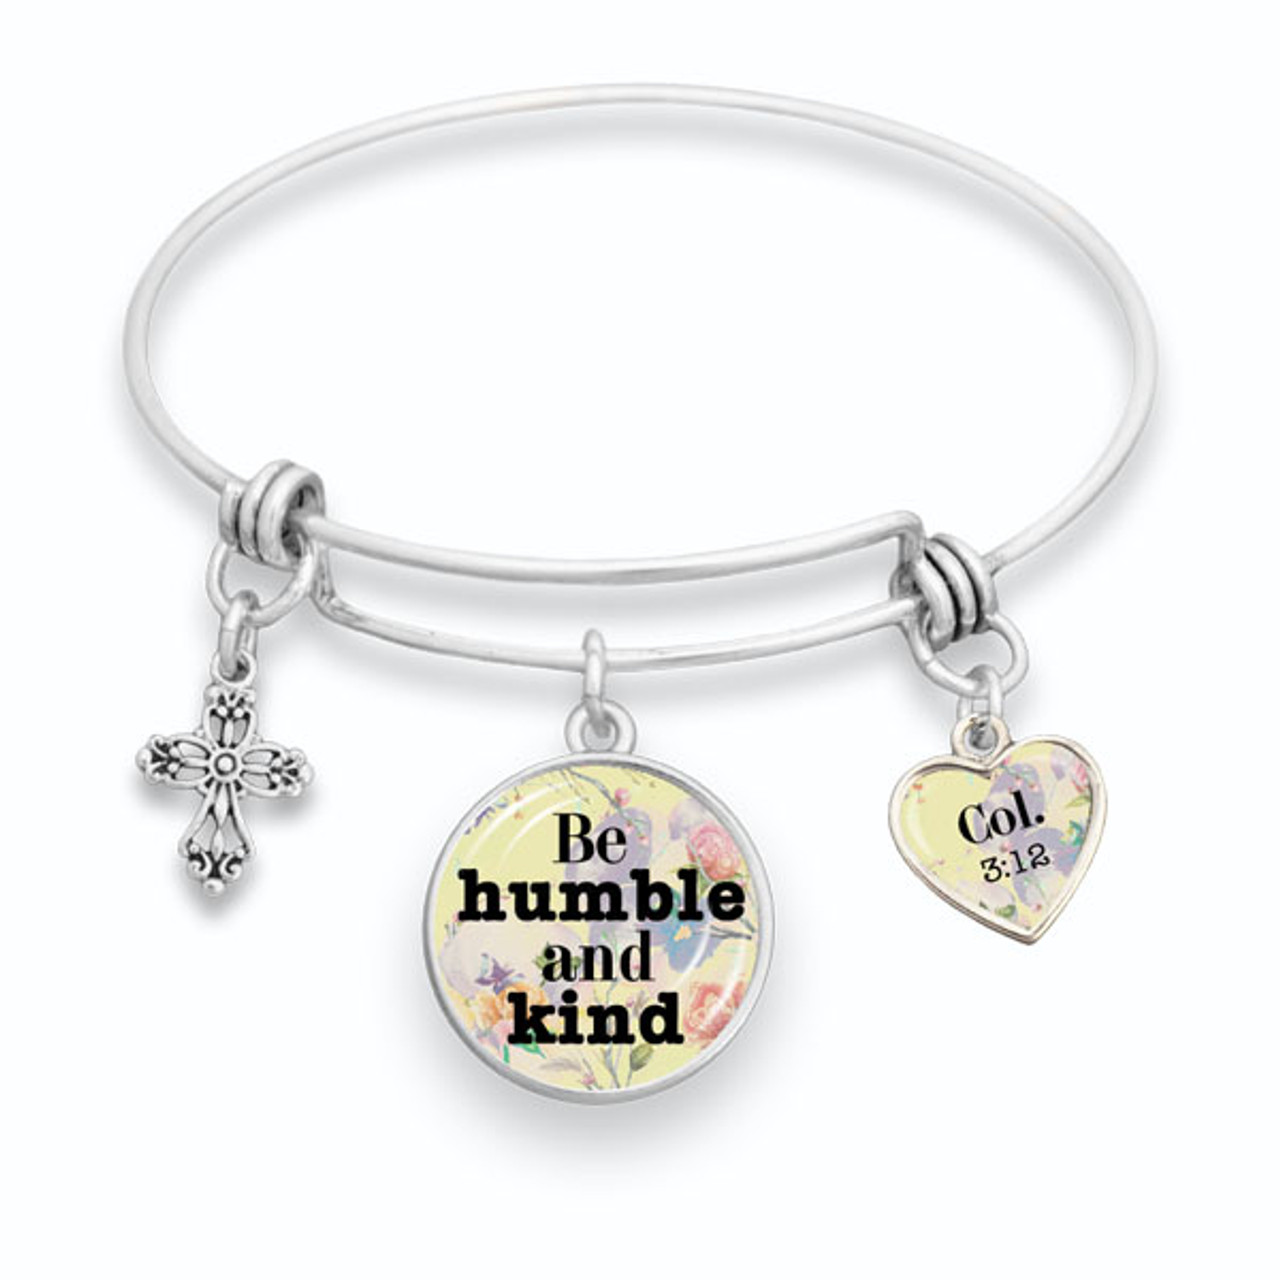 Faith Can Move Mountains Collection- Be Humble And Kind Wire Bangle Bracelet